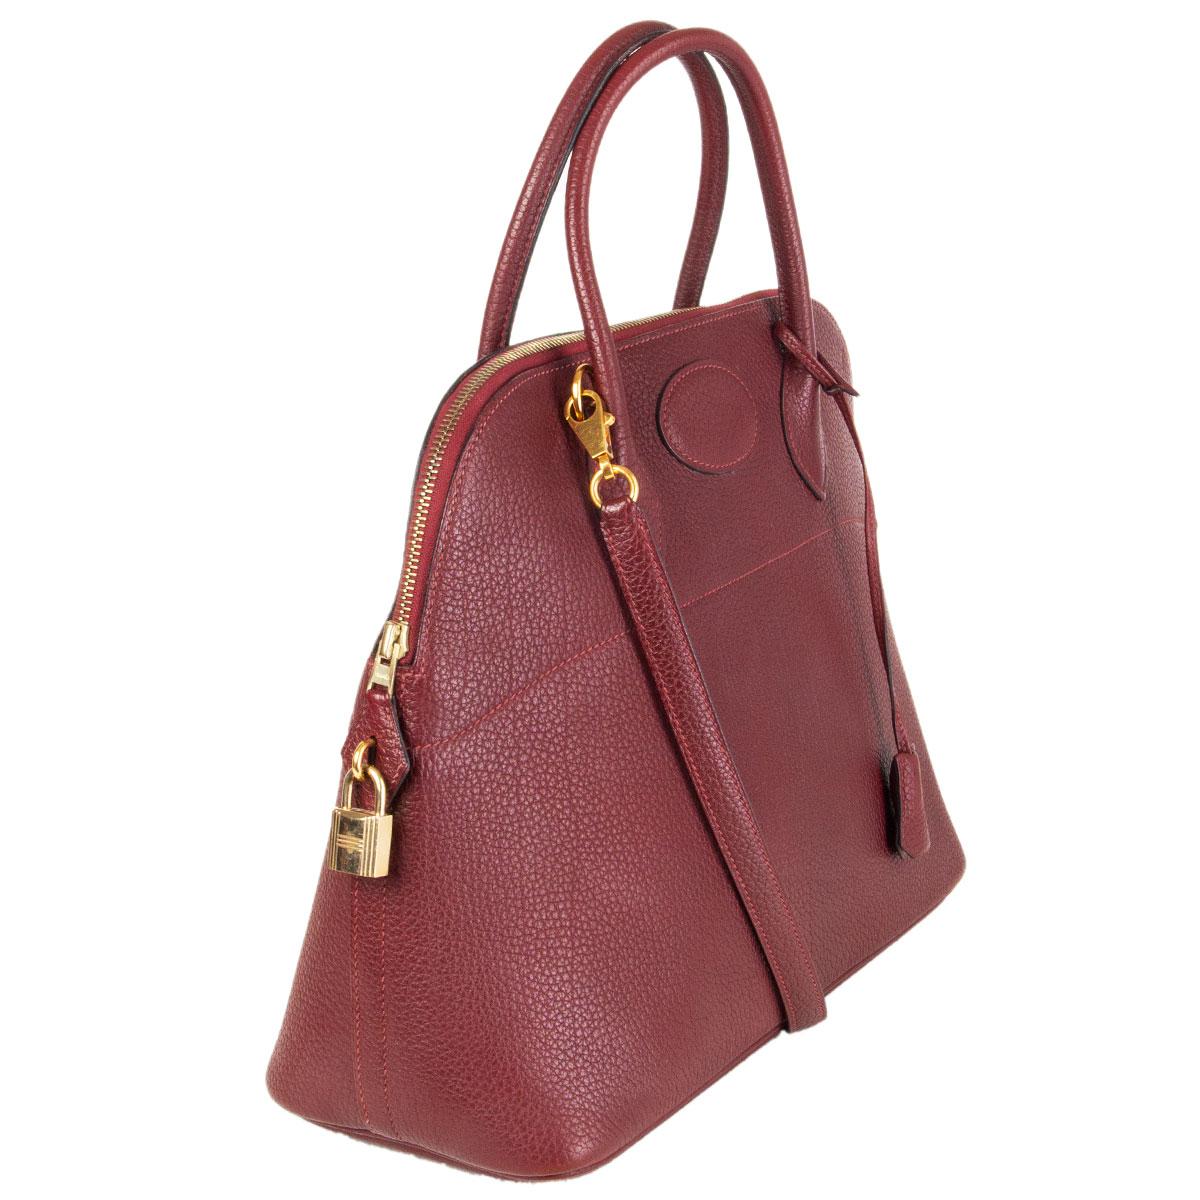 100% authentic Hermes 'Bolide 35' bag in Rouge H (burgundy) Vache Fjord leather (grained) with gold-plated hardware. Lined in Roughe H lamb skin leather with an open pocket against the back. Has been carried and is in excellent condition. Comes with